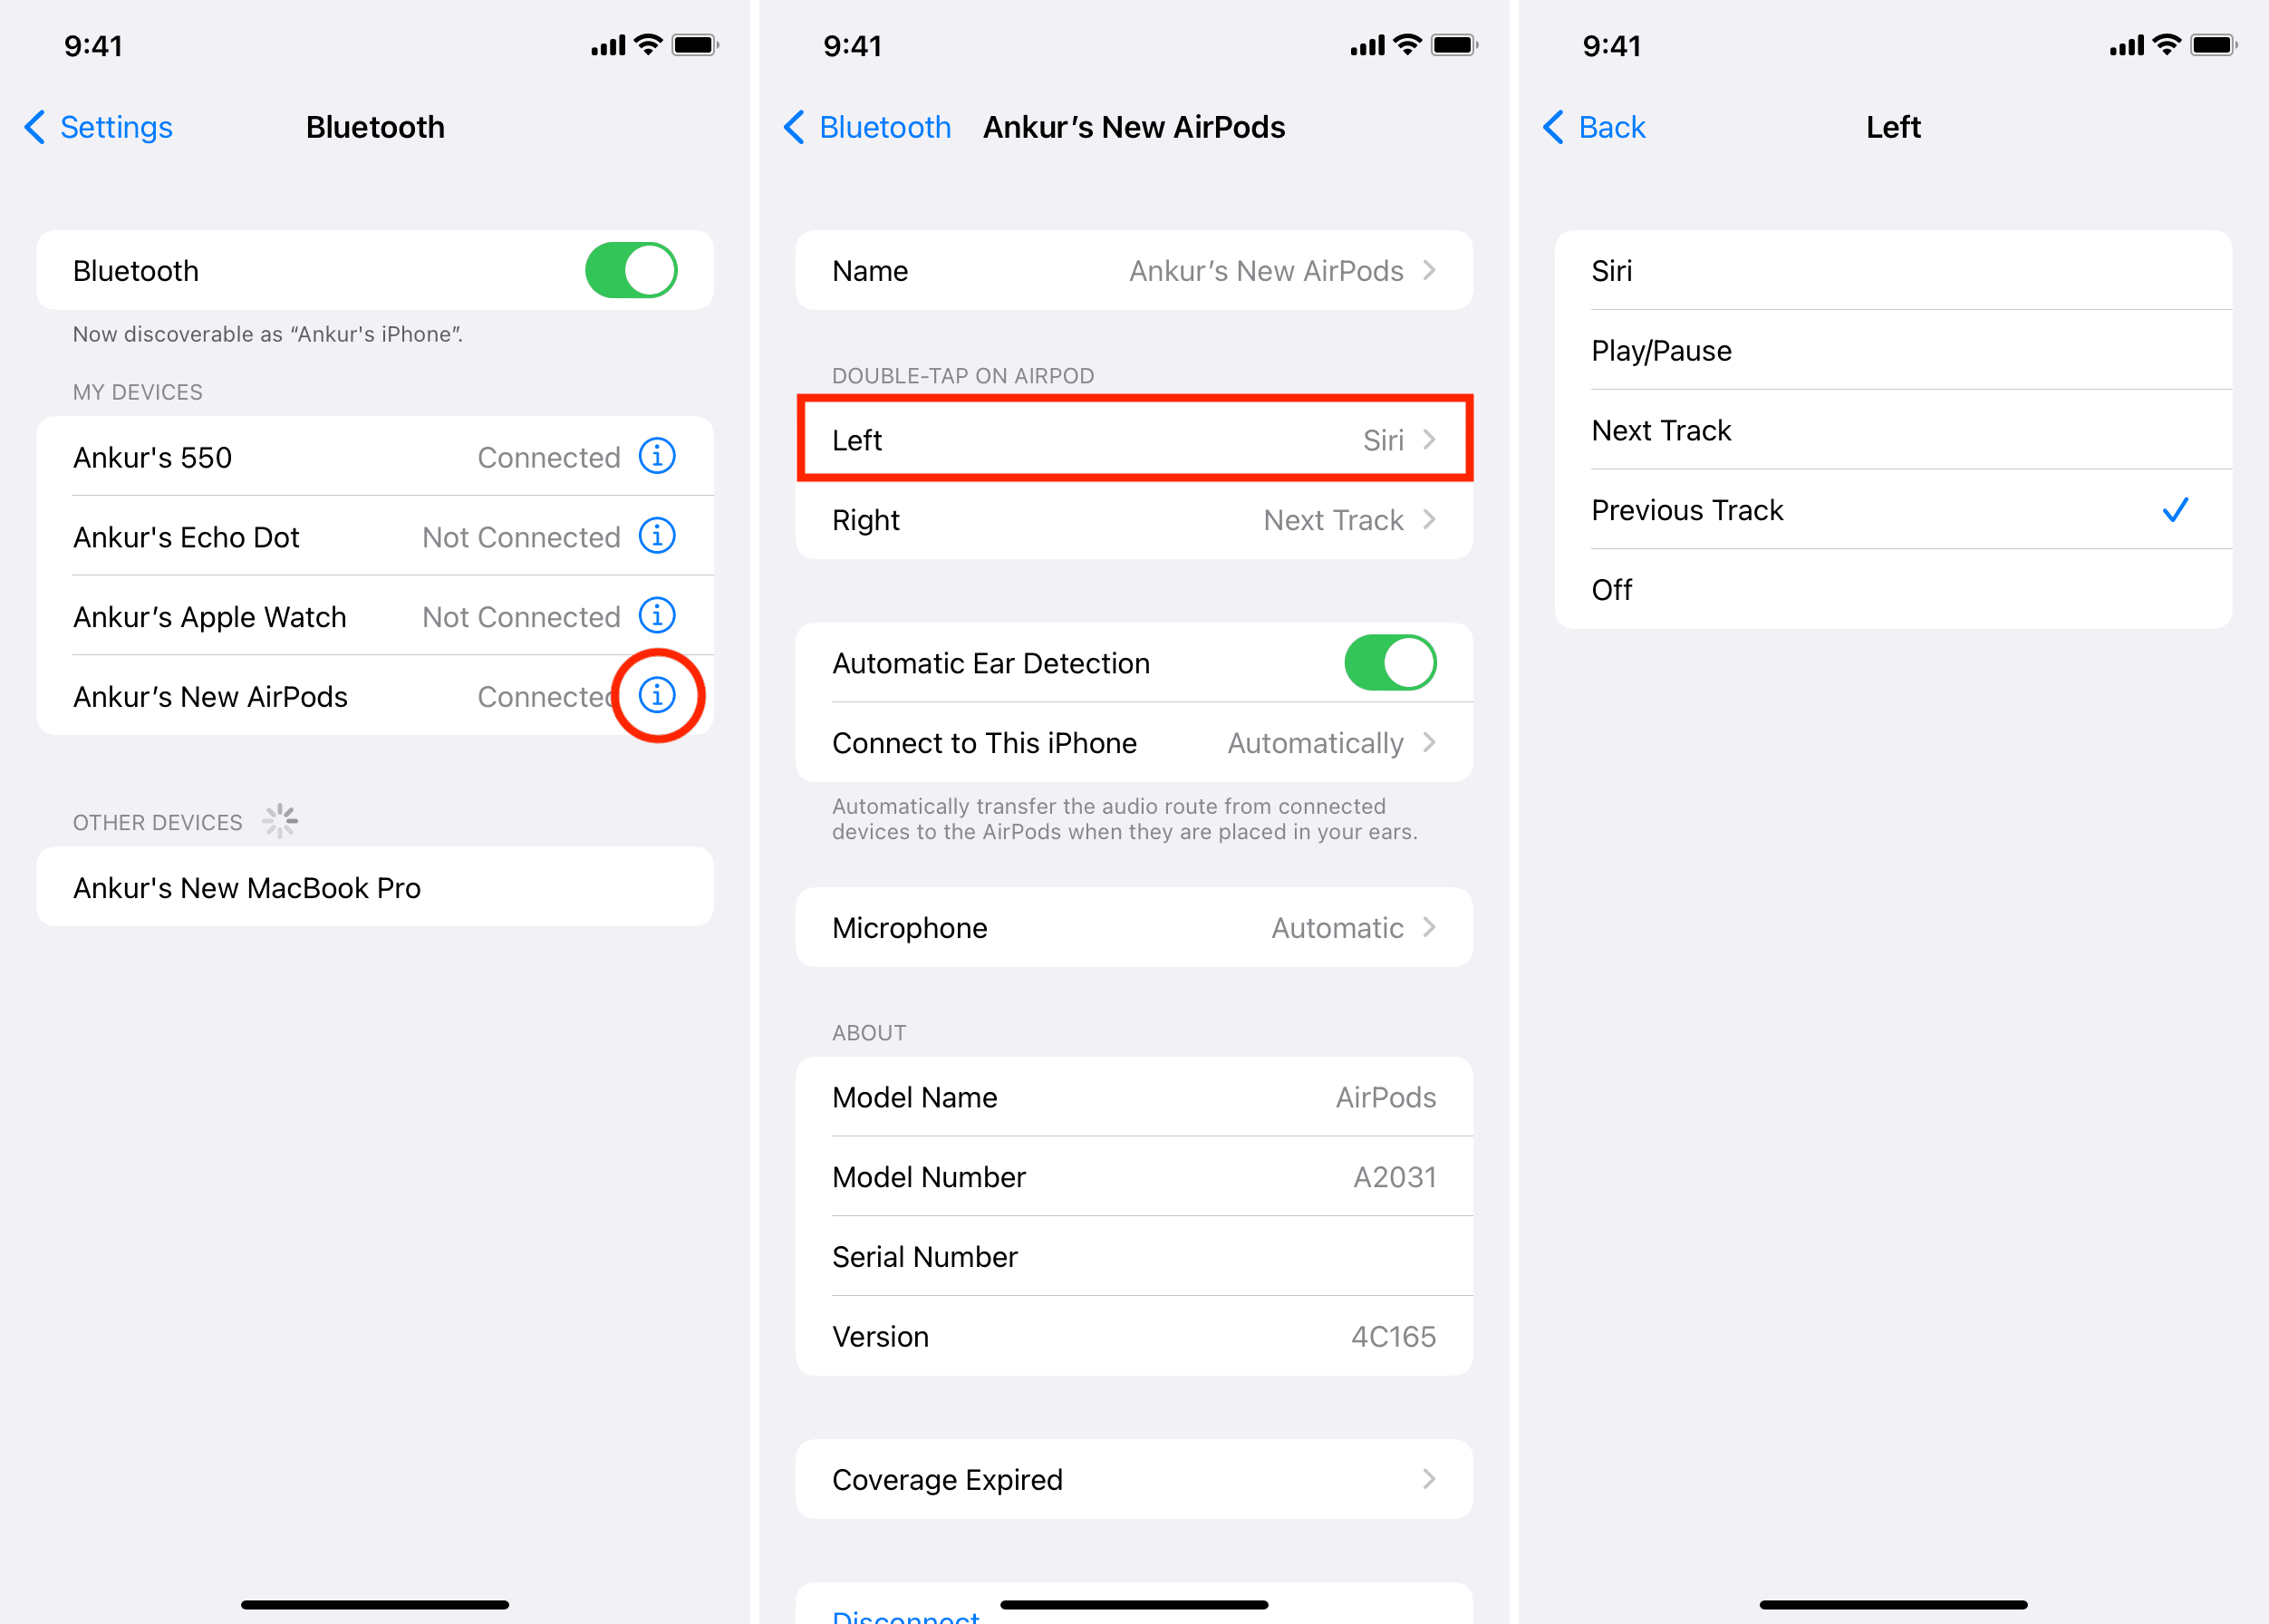 How to turn Siri off on AirPods